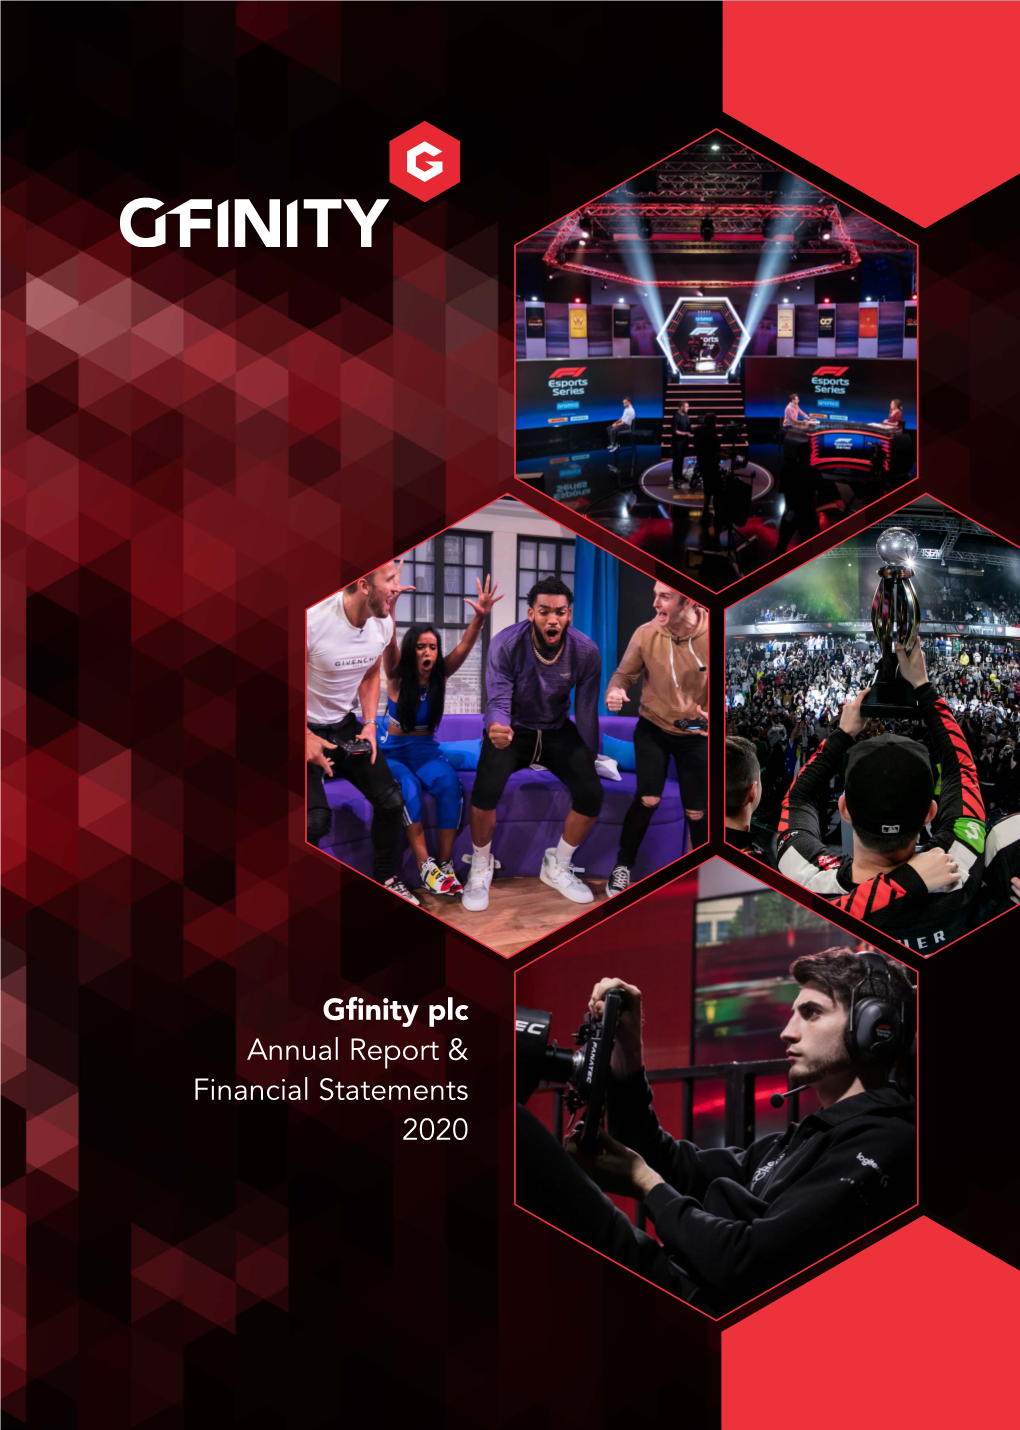 Gfinity Plc Annual Report & Financial Statements 2020